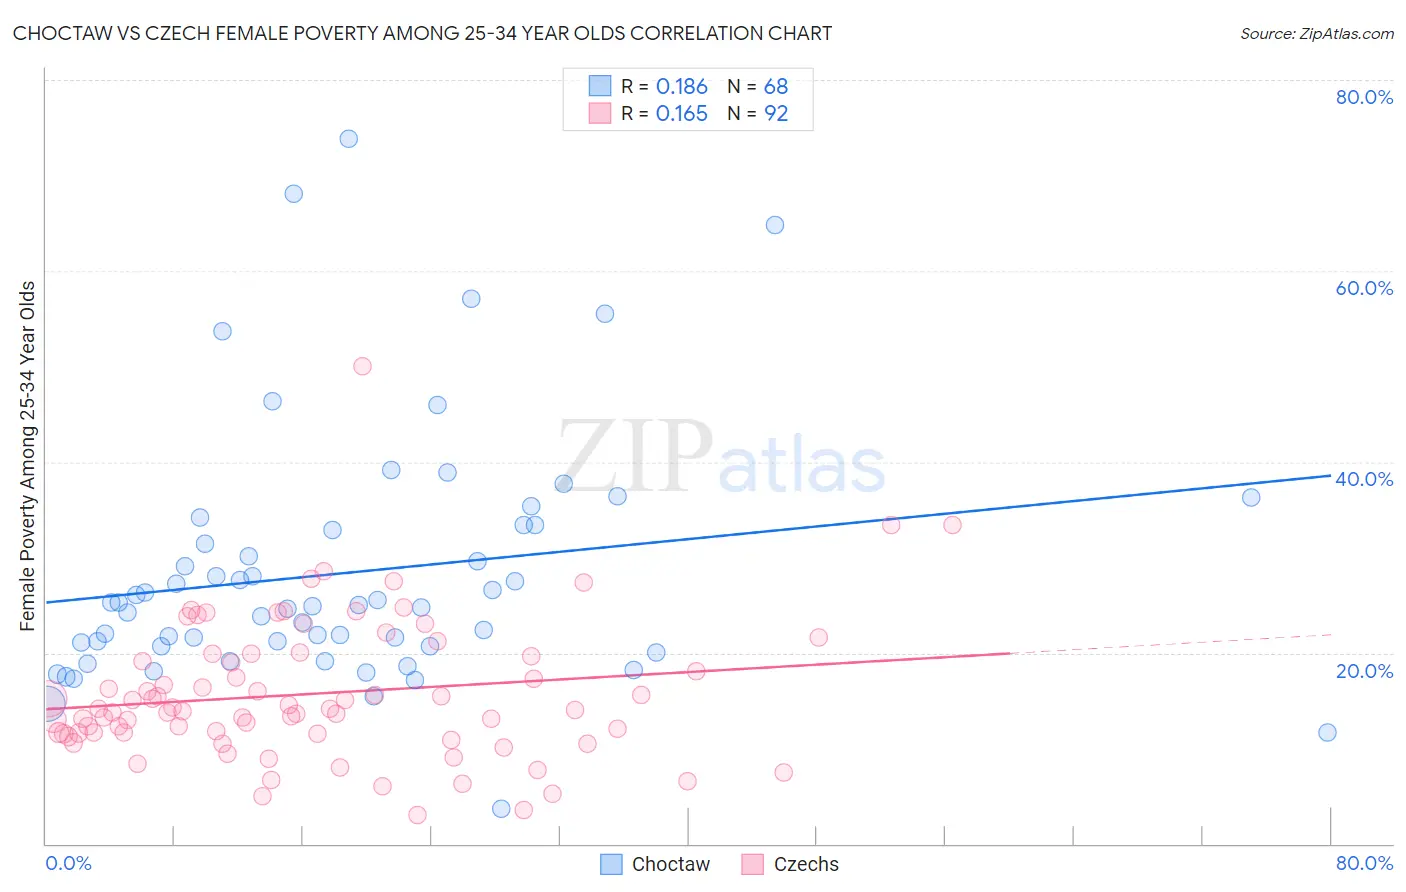 Choctaw vs Czech Female Poverty Among 25-34 Year Olds